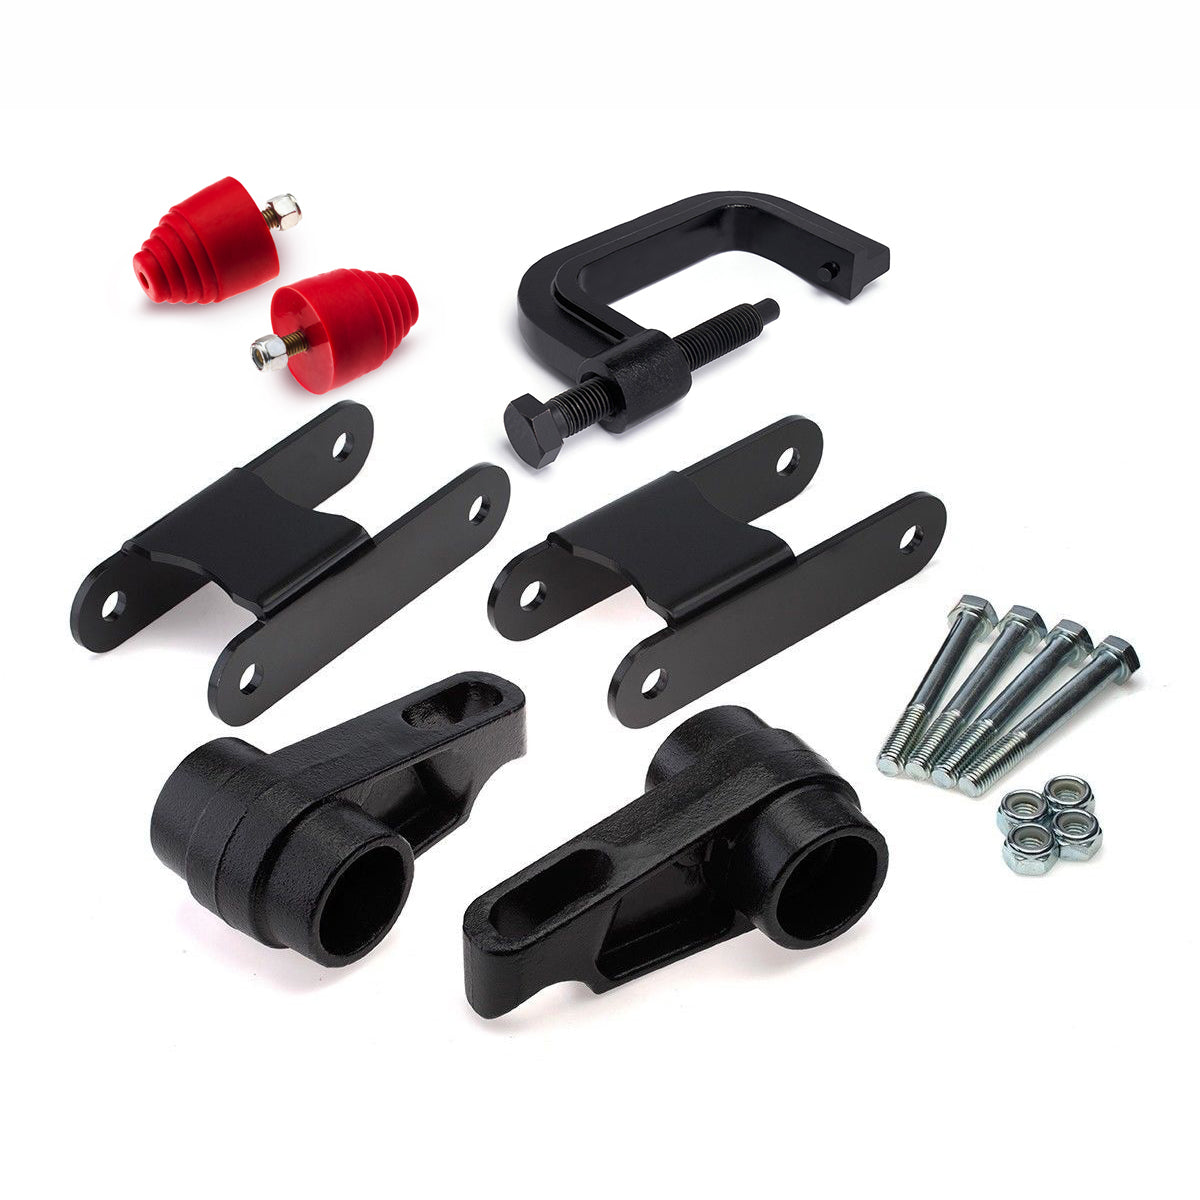 2004-2012 Chevy Colorado Full Lift Kit with Bump Stops and Torsion Key Unloading/Removal Tool